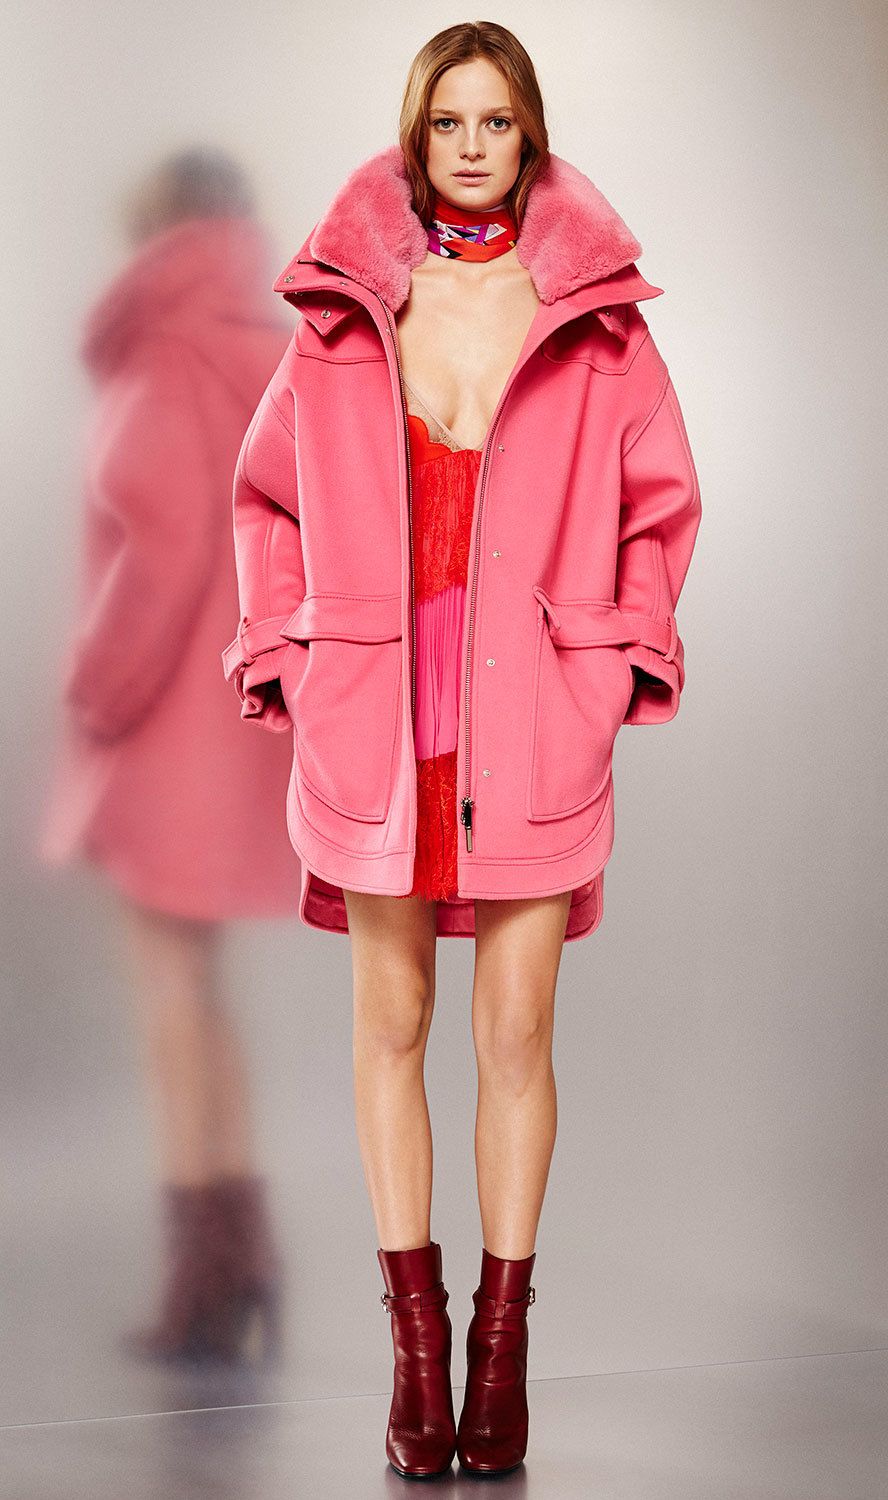 Clothing, Sleeve, Human leg, Fashion show, Red, Joint, Outerwear, Pink, Fashion model, Street fashion, 